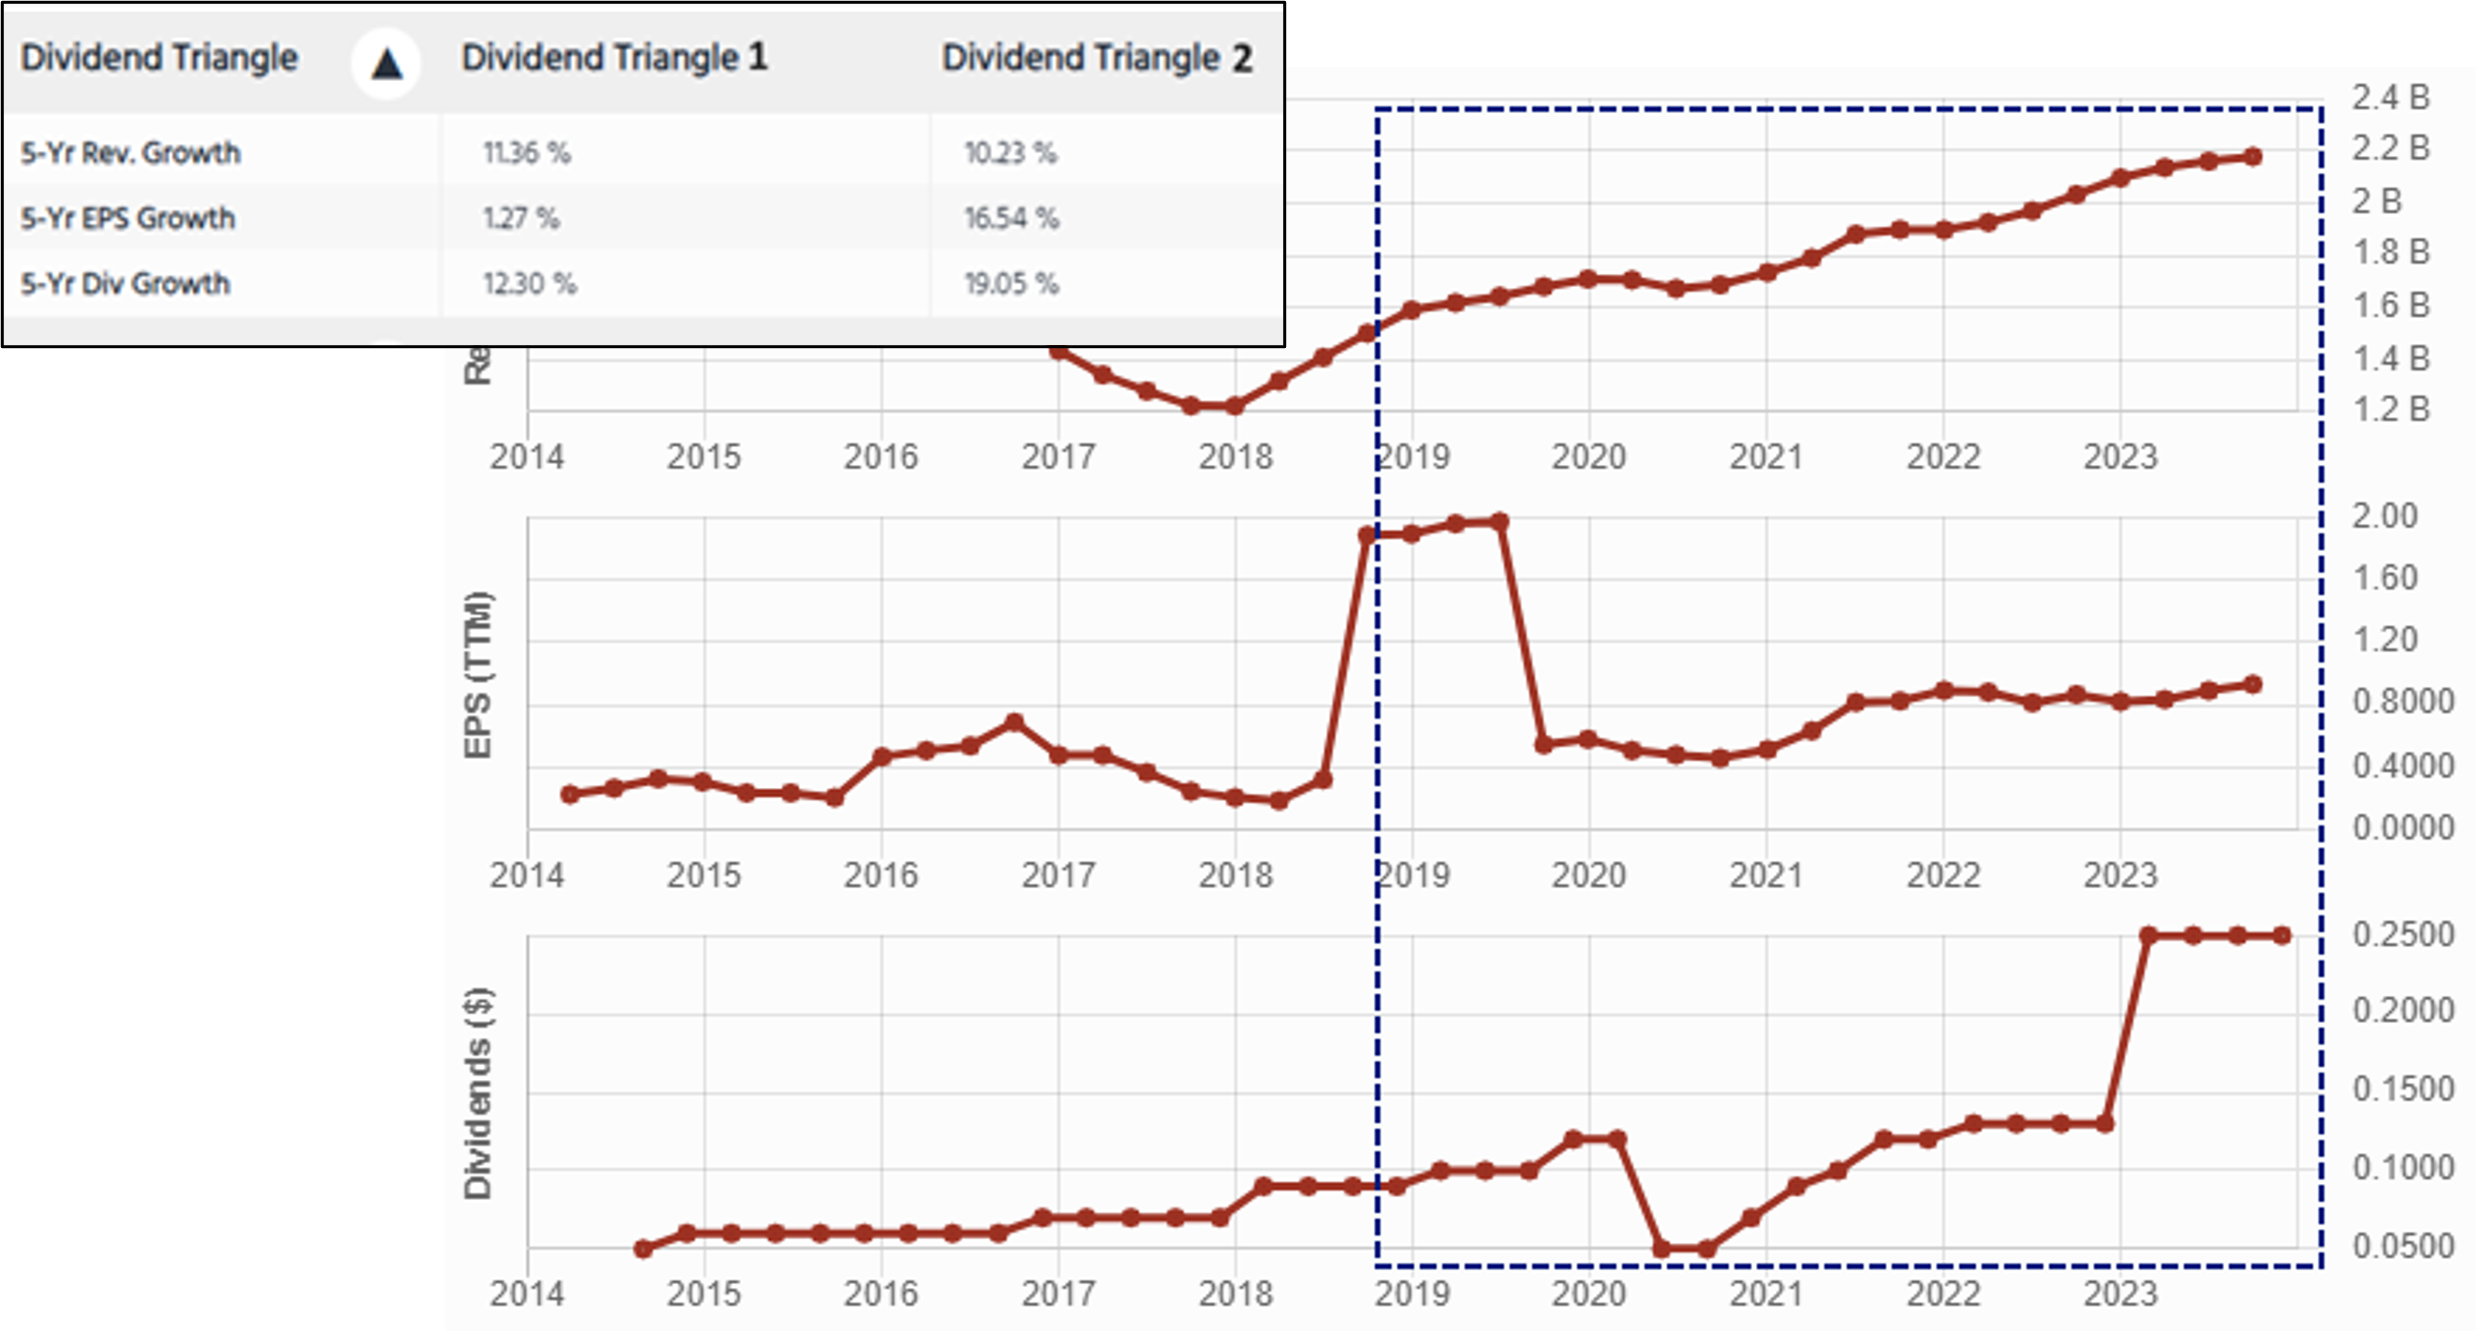 Dividend triangle 5-Yr metrics and graphical view of triangle 1 showing the trend for each